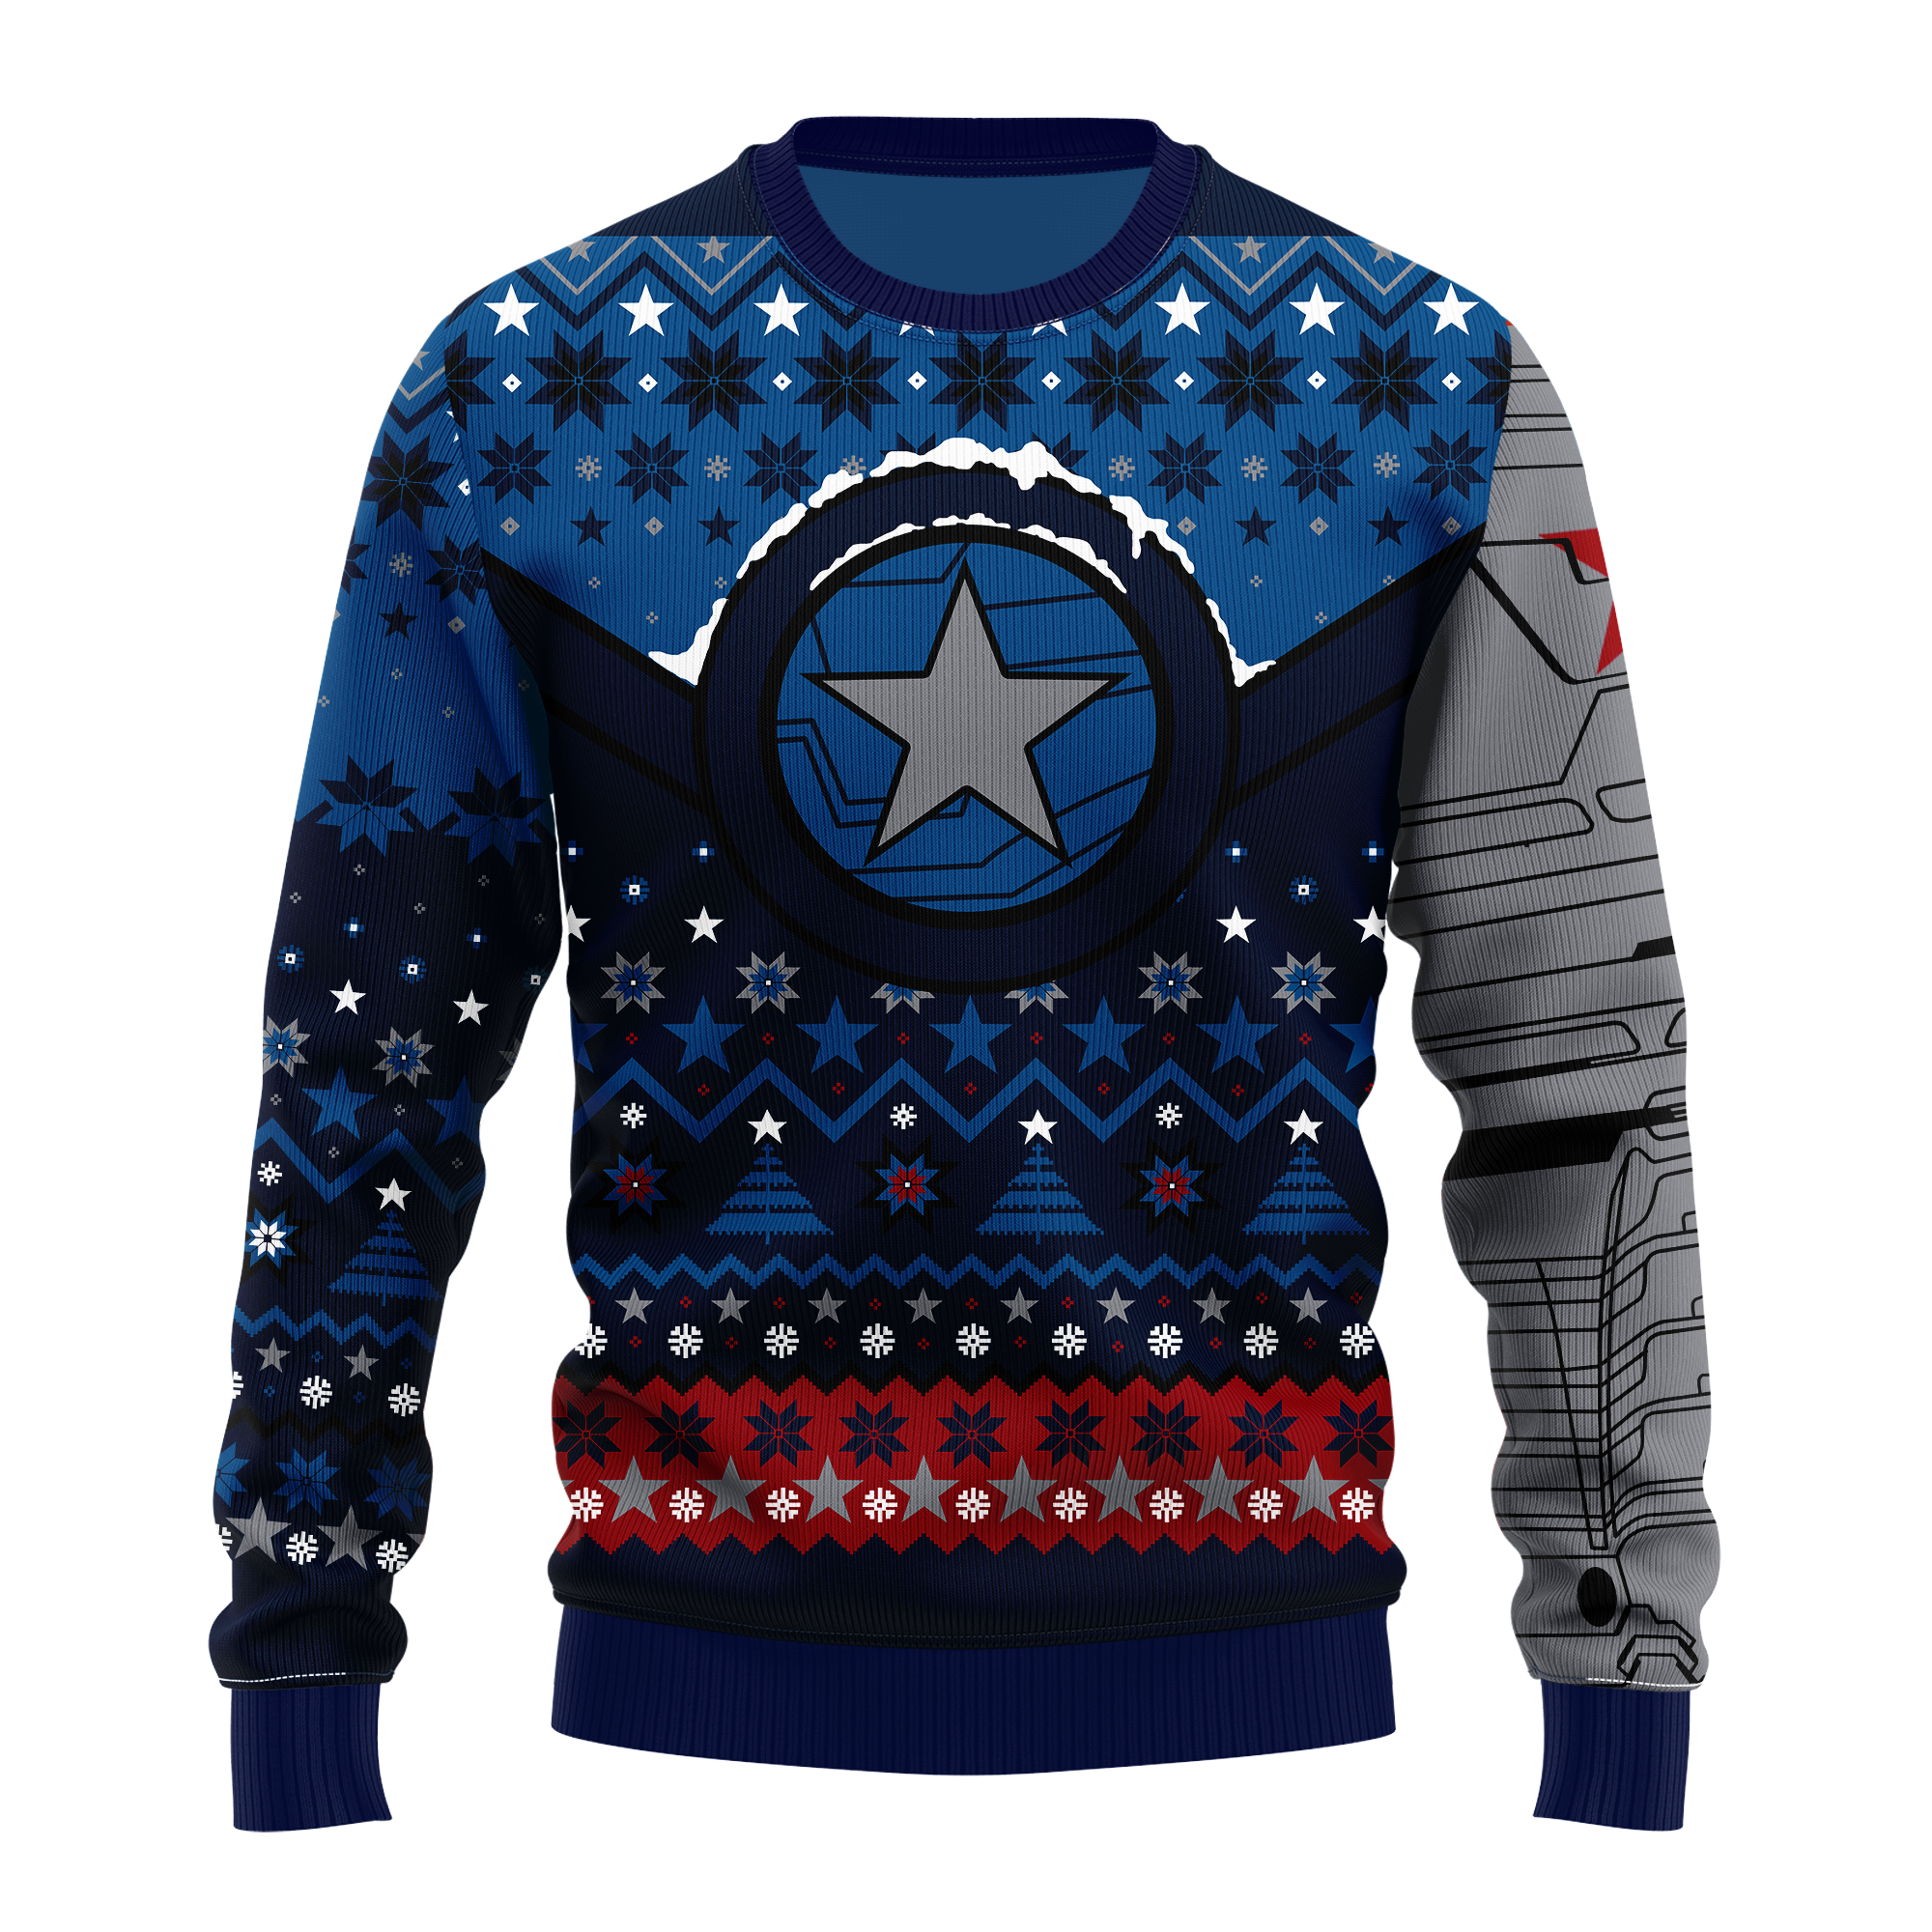 Winter Soldier Ugly Christmas Sweater Xmas Gift